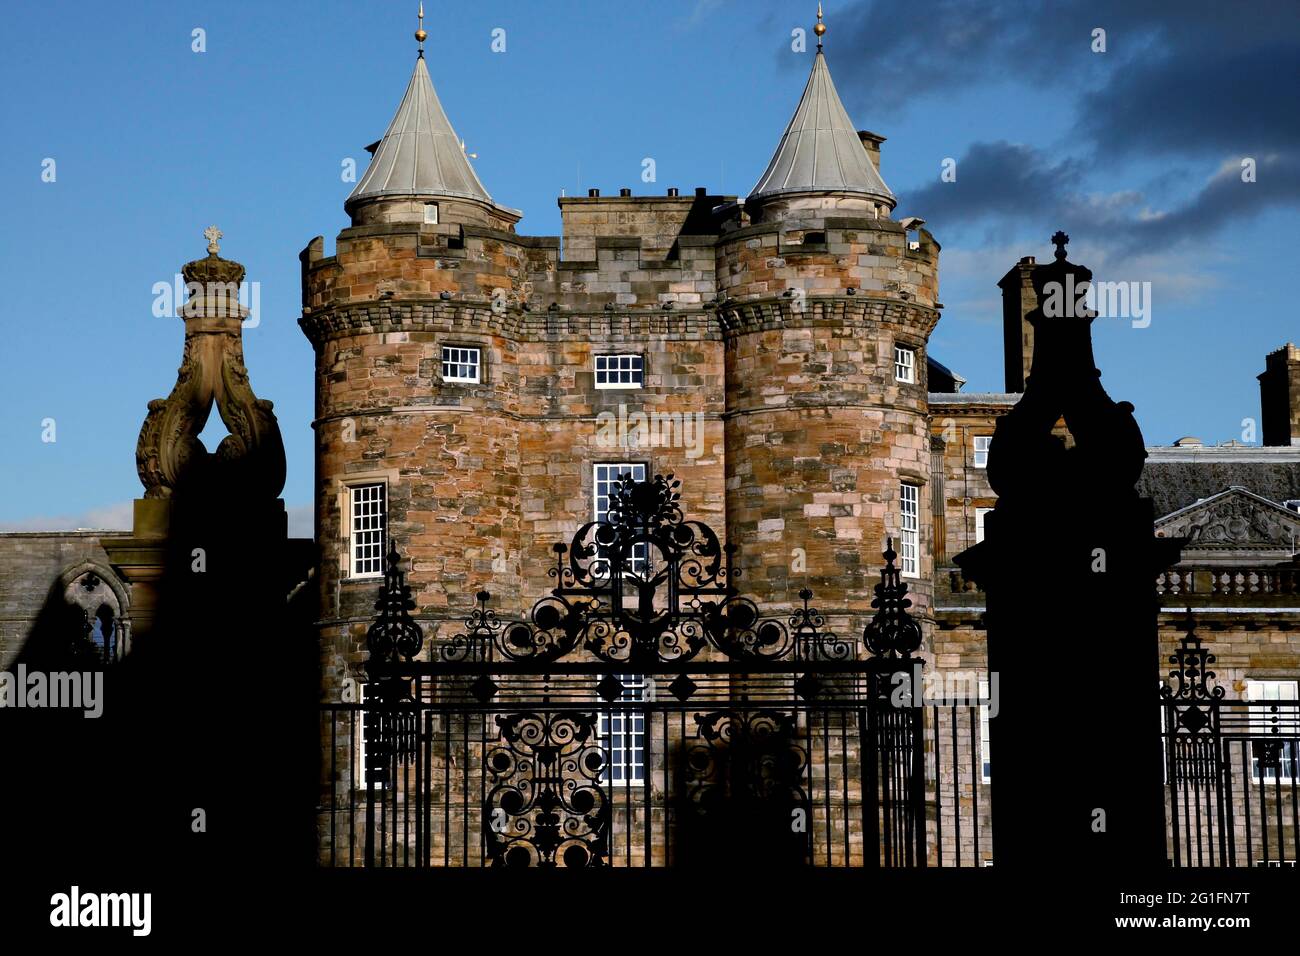 Palace of Holyroodhouse, castle, royal palace, Scottish residence of the kings of Great Britain, Edinburgh, Scotland, Great Britain Stock Photo